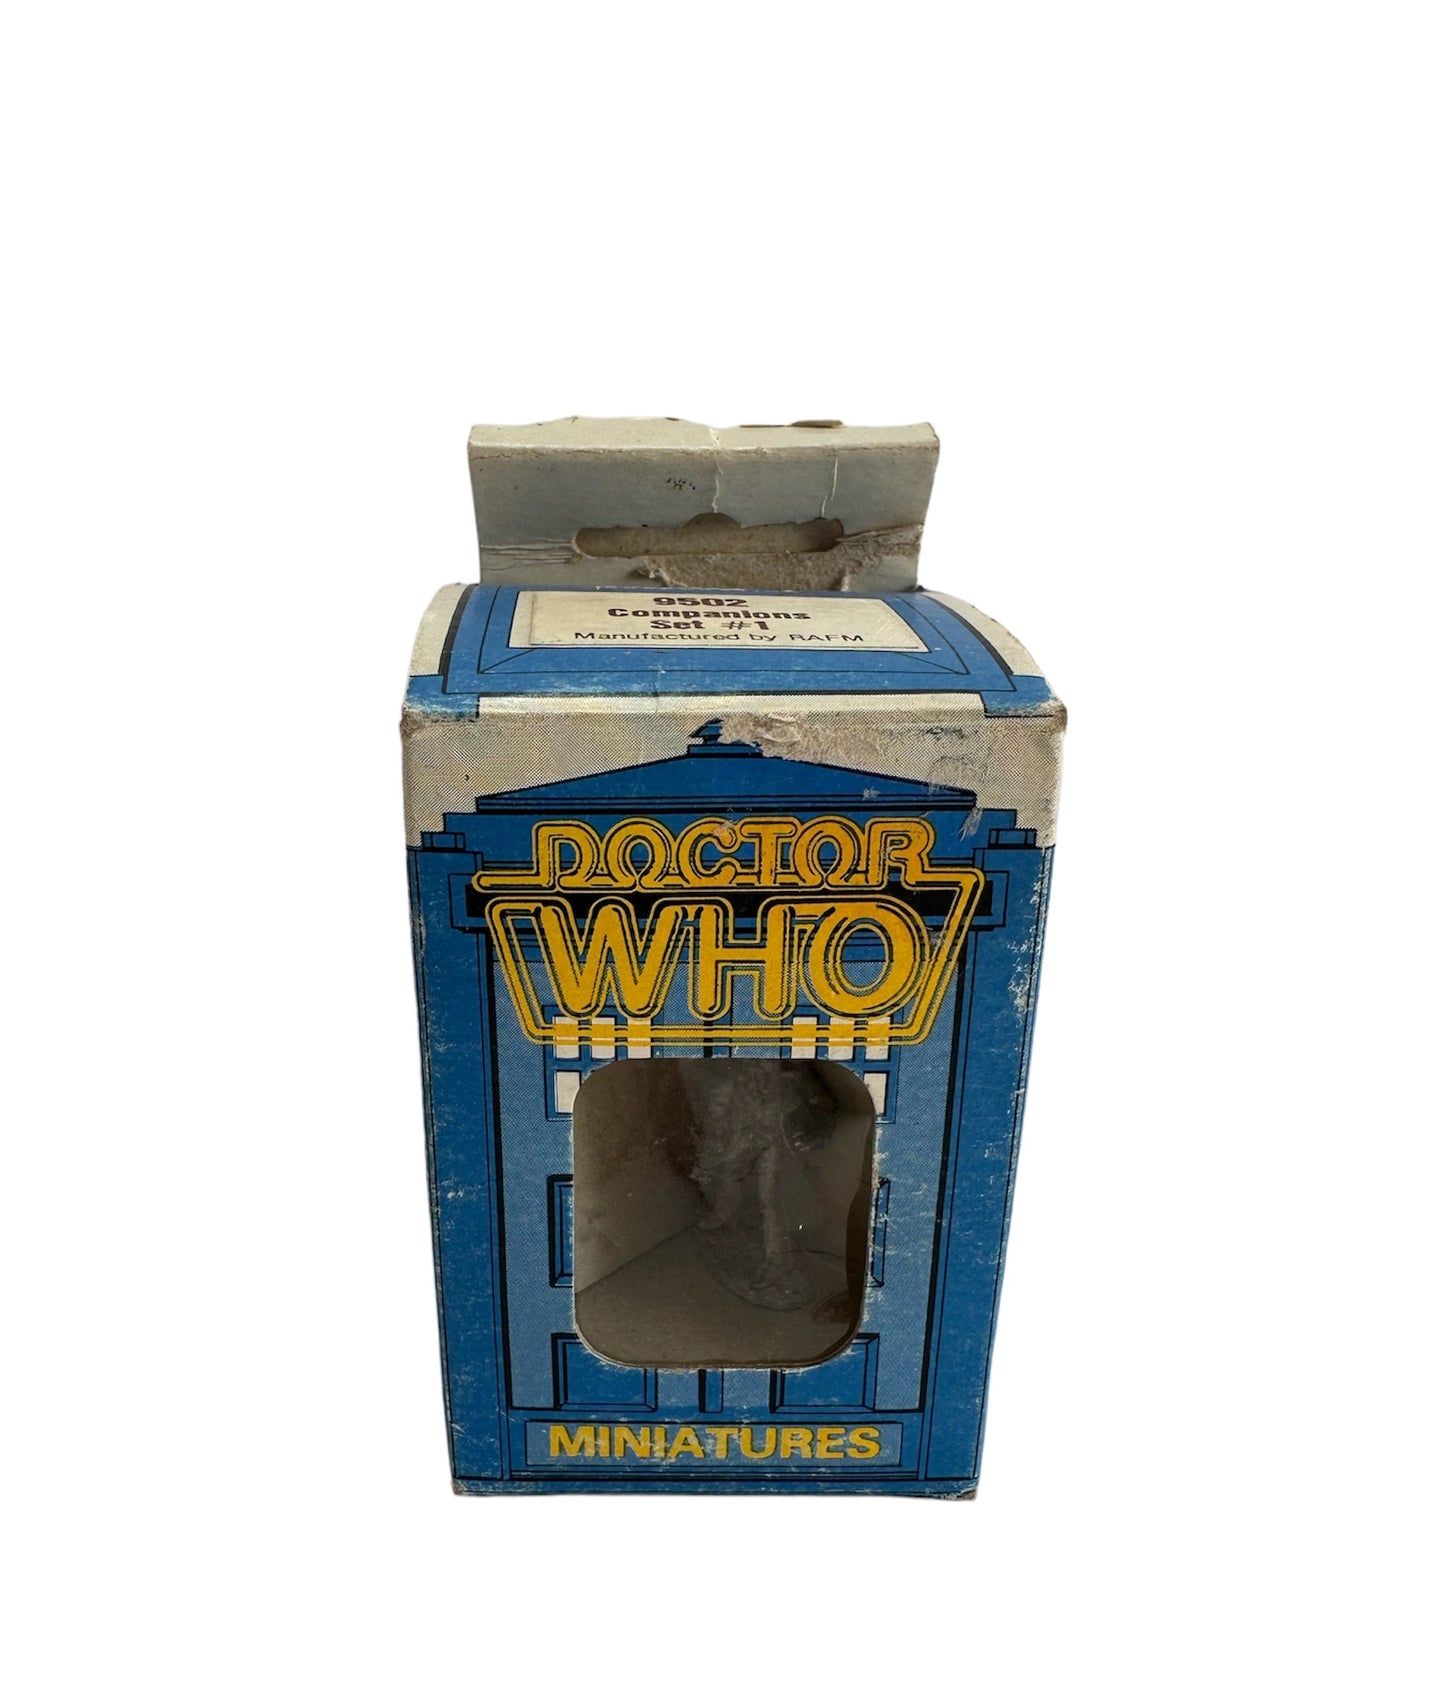 Vintage FASA Corp 1996 Doctor Dr Who Citadel Miniatures 9502 - Companions Set No. 1 - Includes Adric, Leela And Sarah Jane Smith - In The Original Box - Shop Stock Room Find